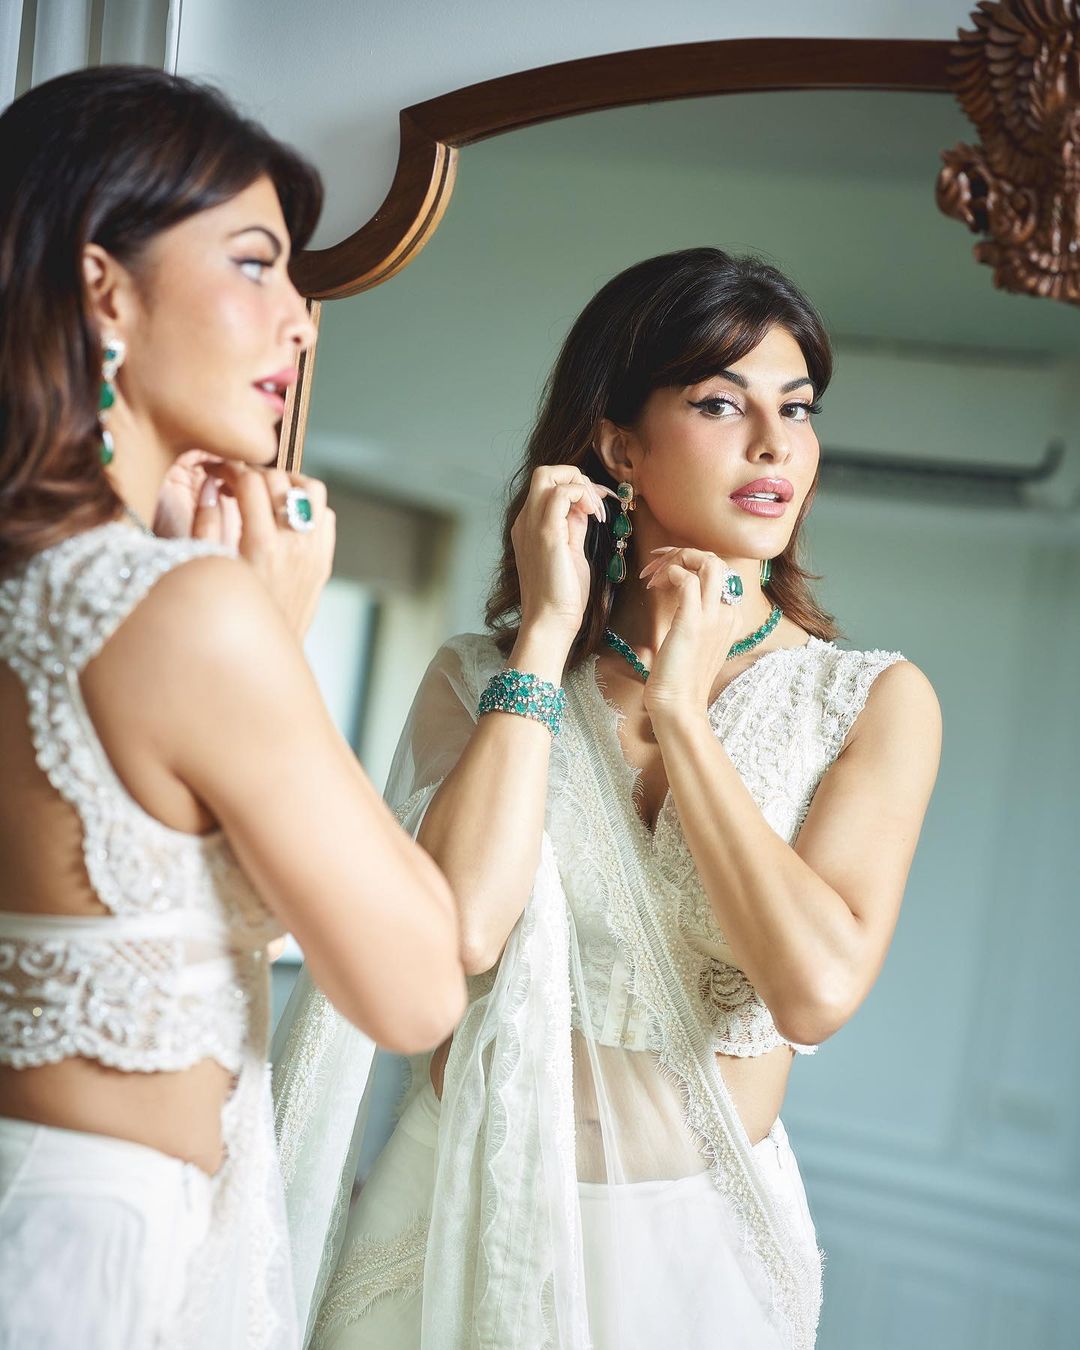 Jacqueline Fernandez pairs the saree with a beautiful lace blouse